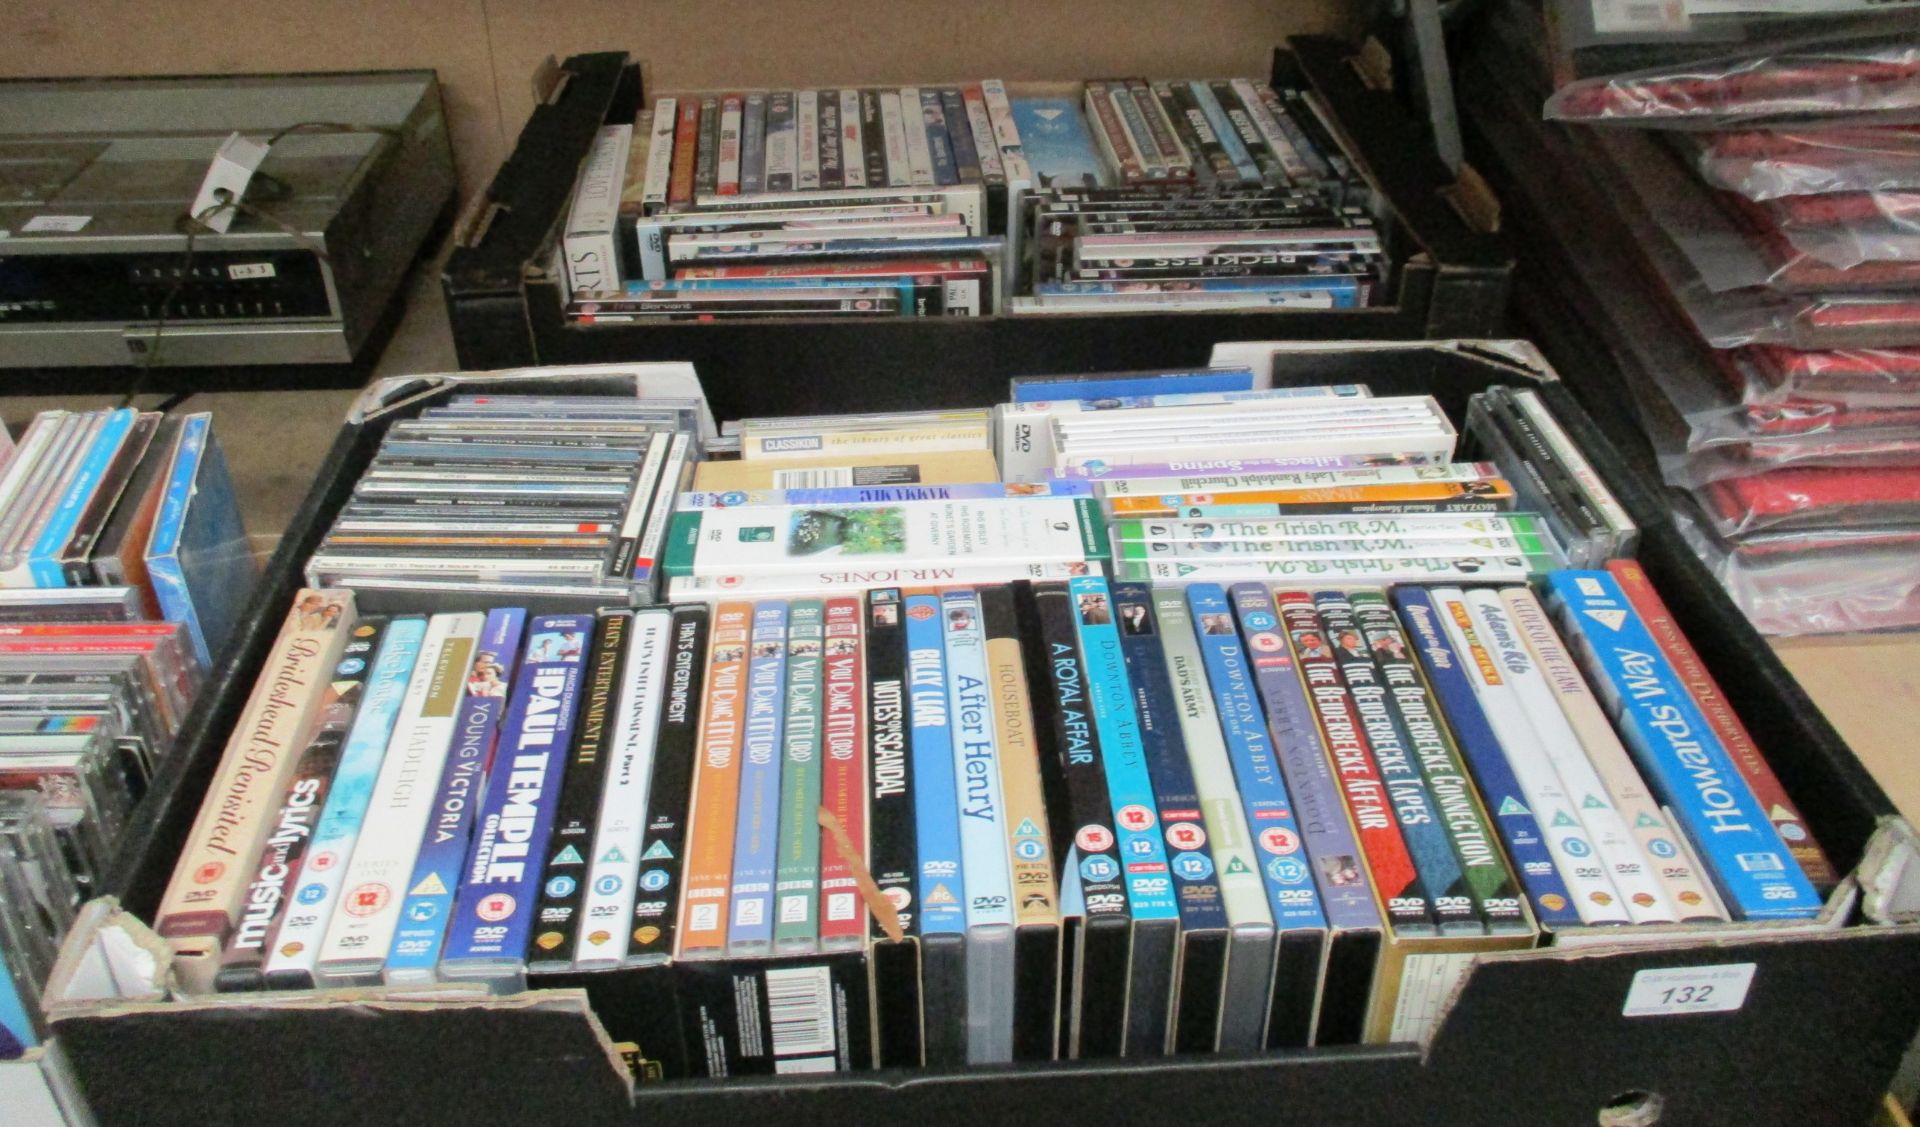 Approximately 120 x DVDs, CDs - Houseboat, Mamma Mia, The Servant,